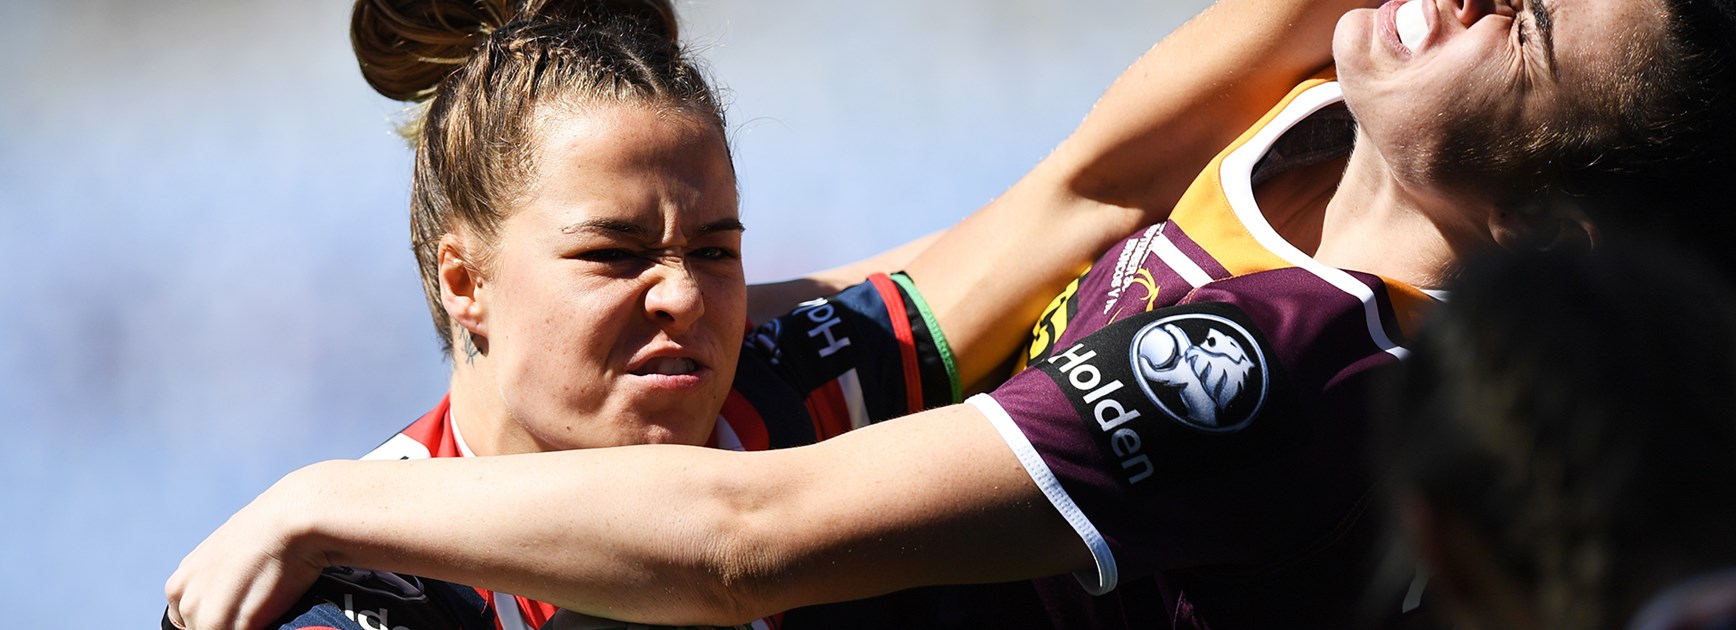 NRLW Broncos v Roosters: Broncos intact; Dibb dropped to bench